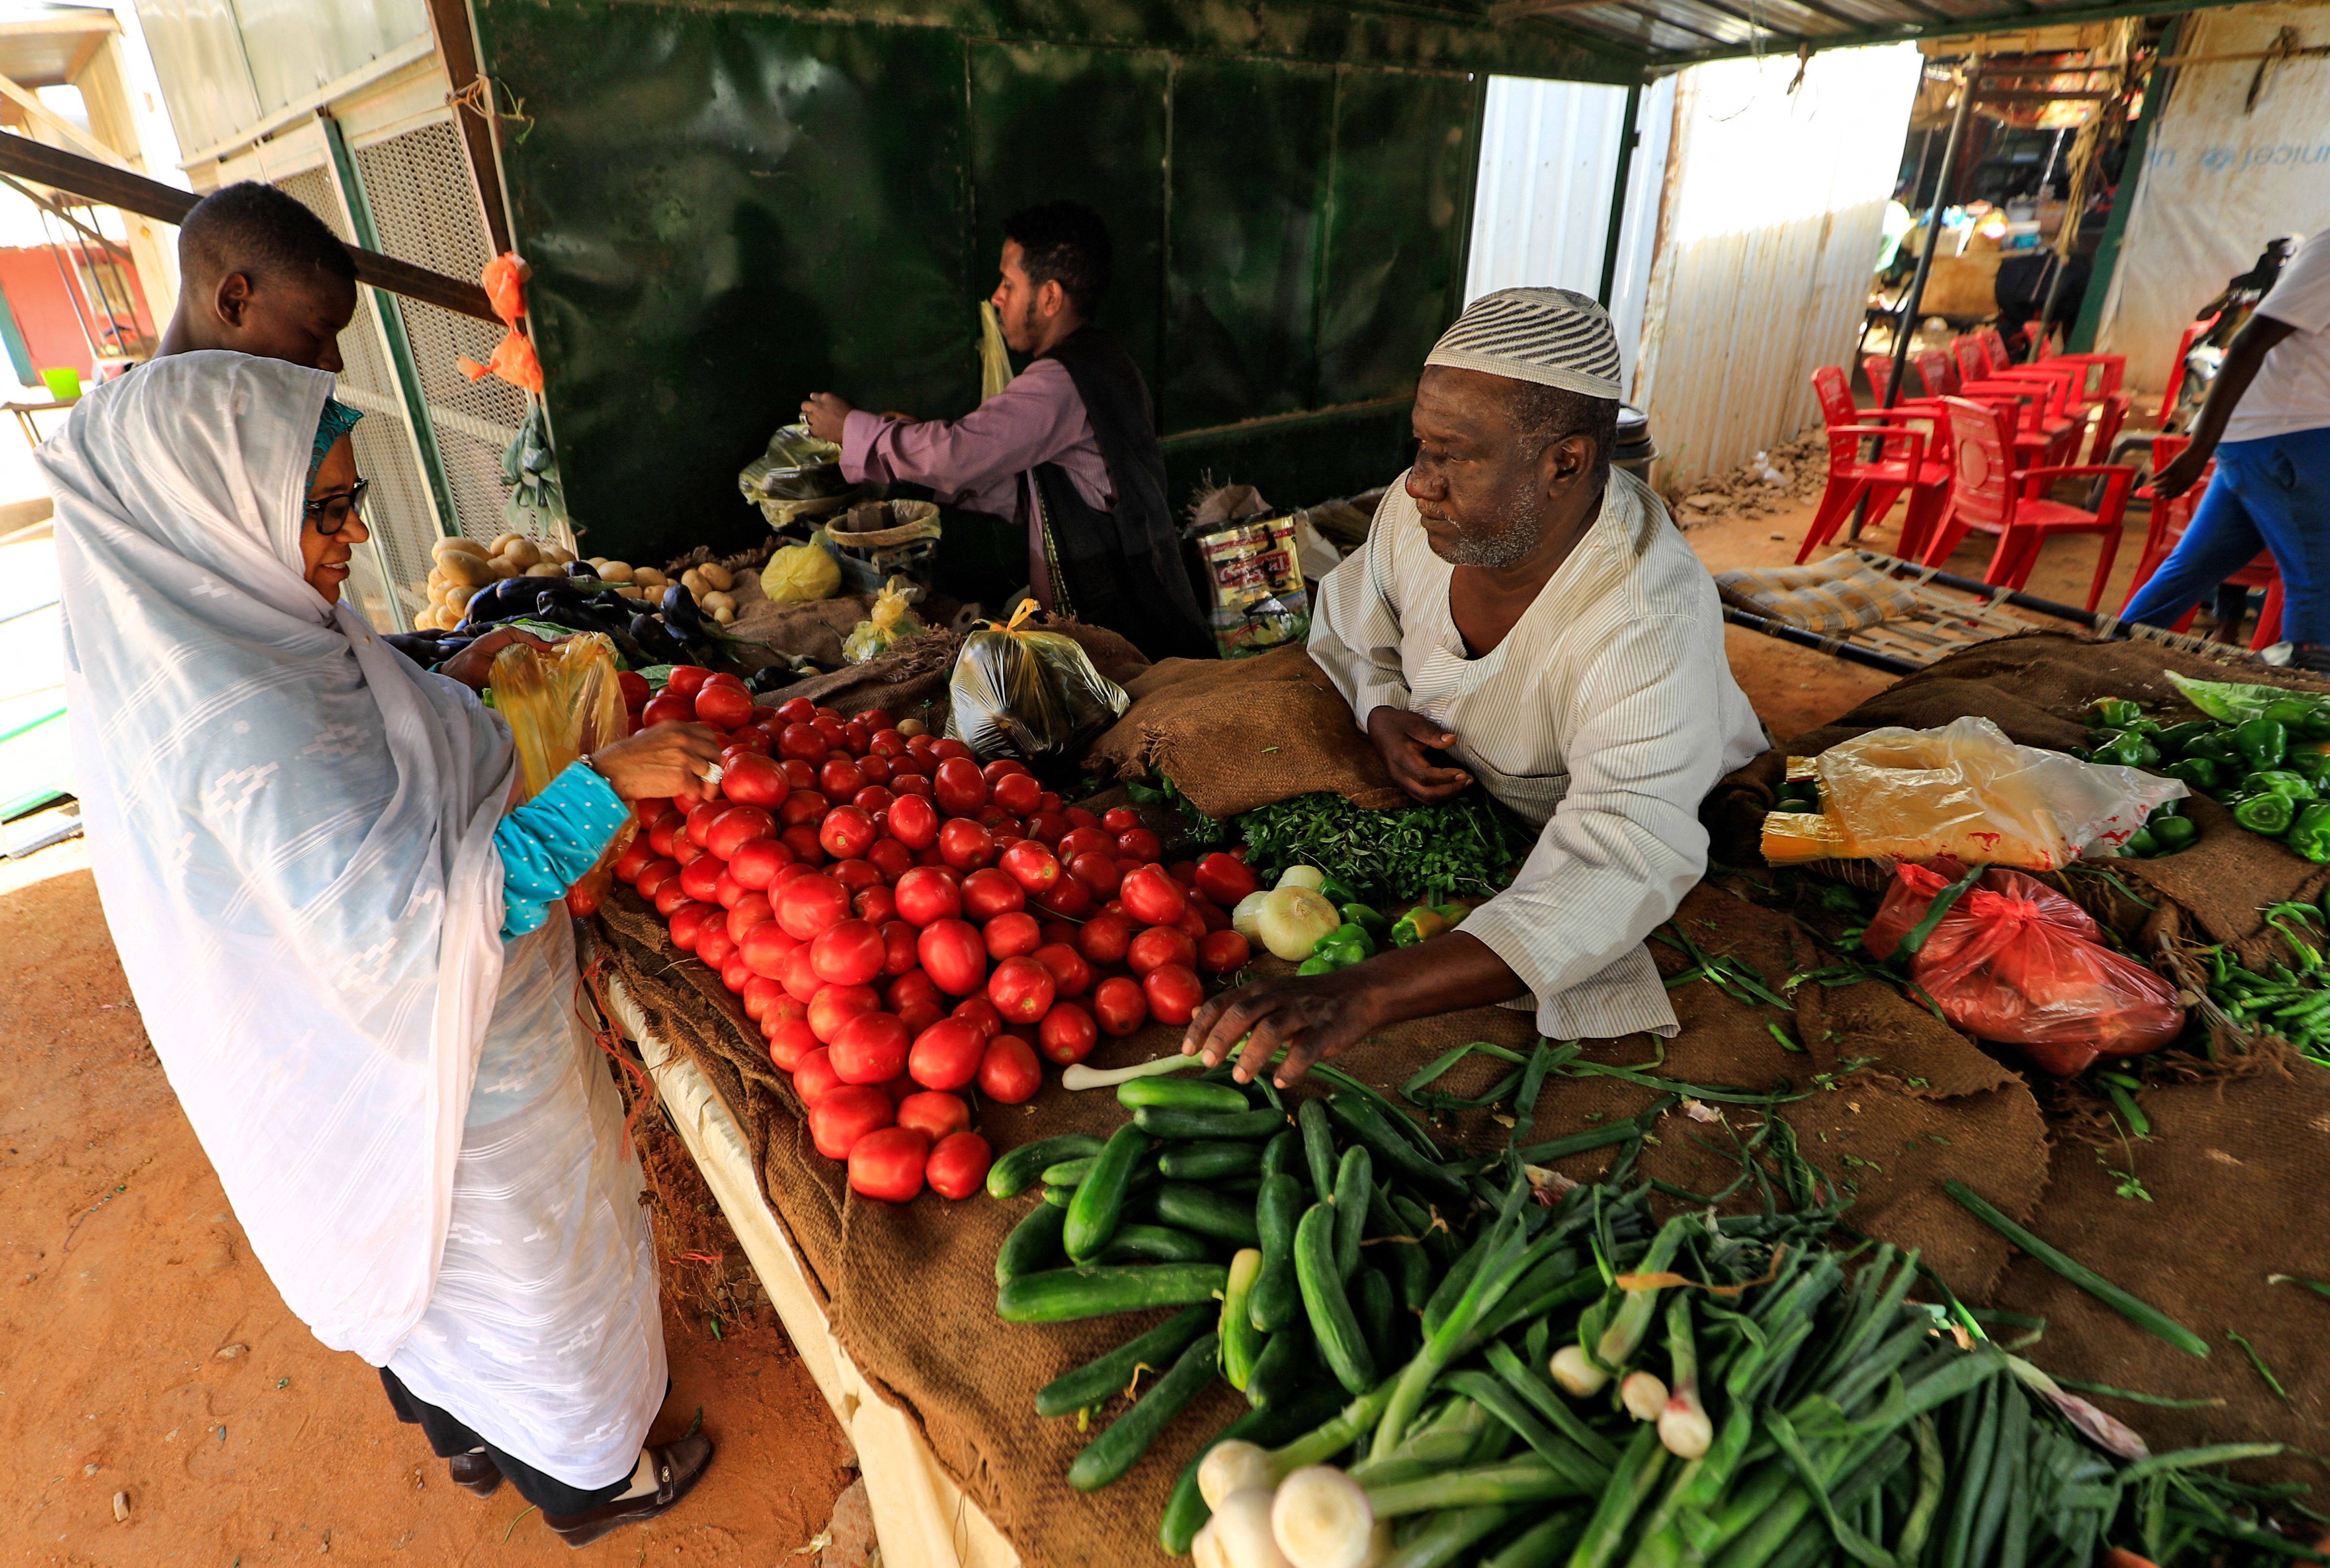 A Sudanese woman buys vegetables at the Al-Khaimah market in Khartoum's Arkawit district on March 17 as food prices rise across Sudan and the region due to the conflict in Ukraine.